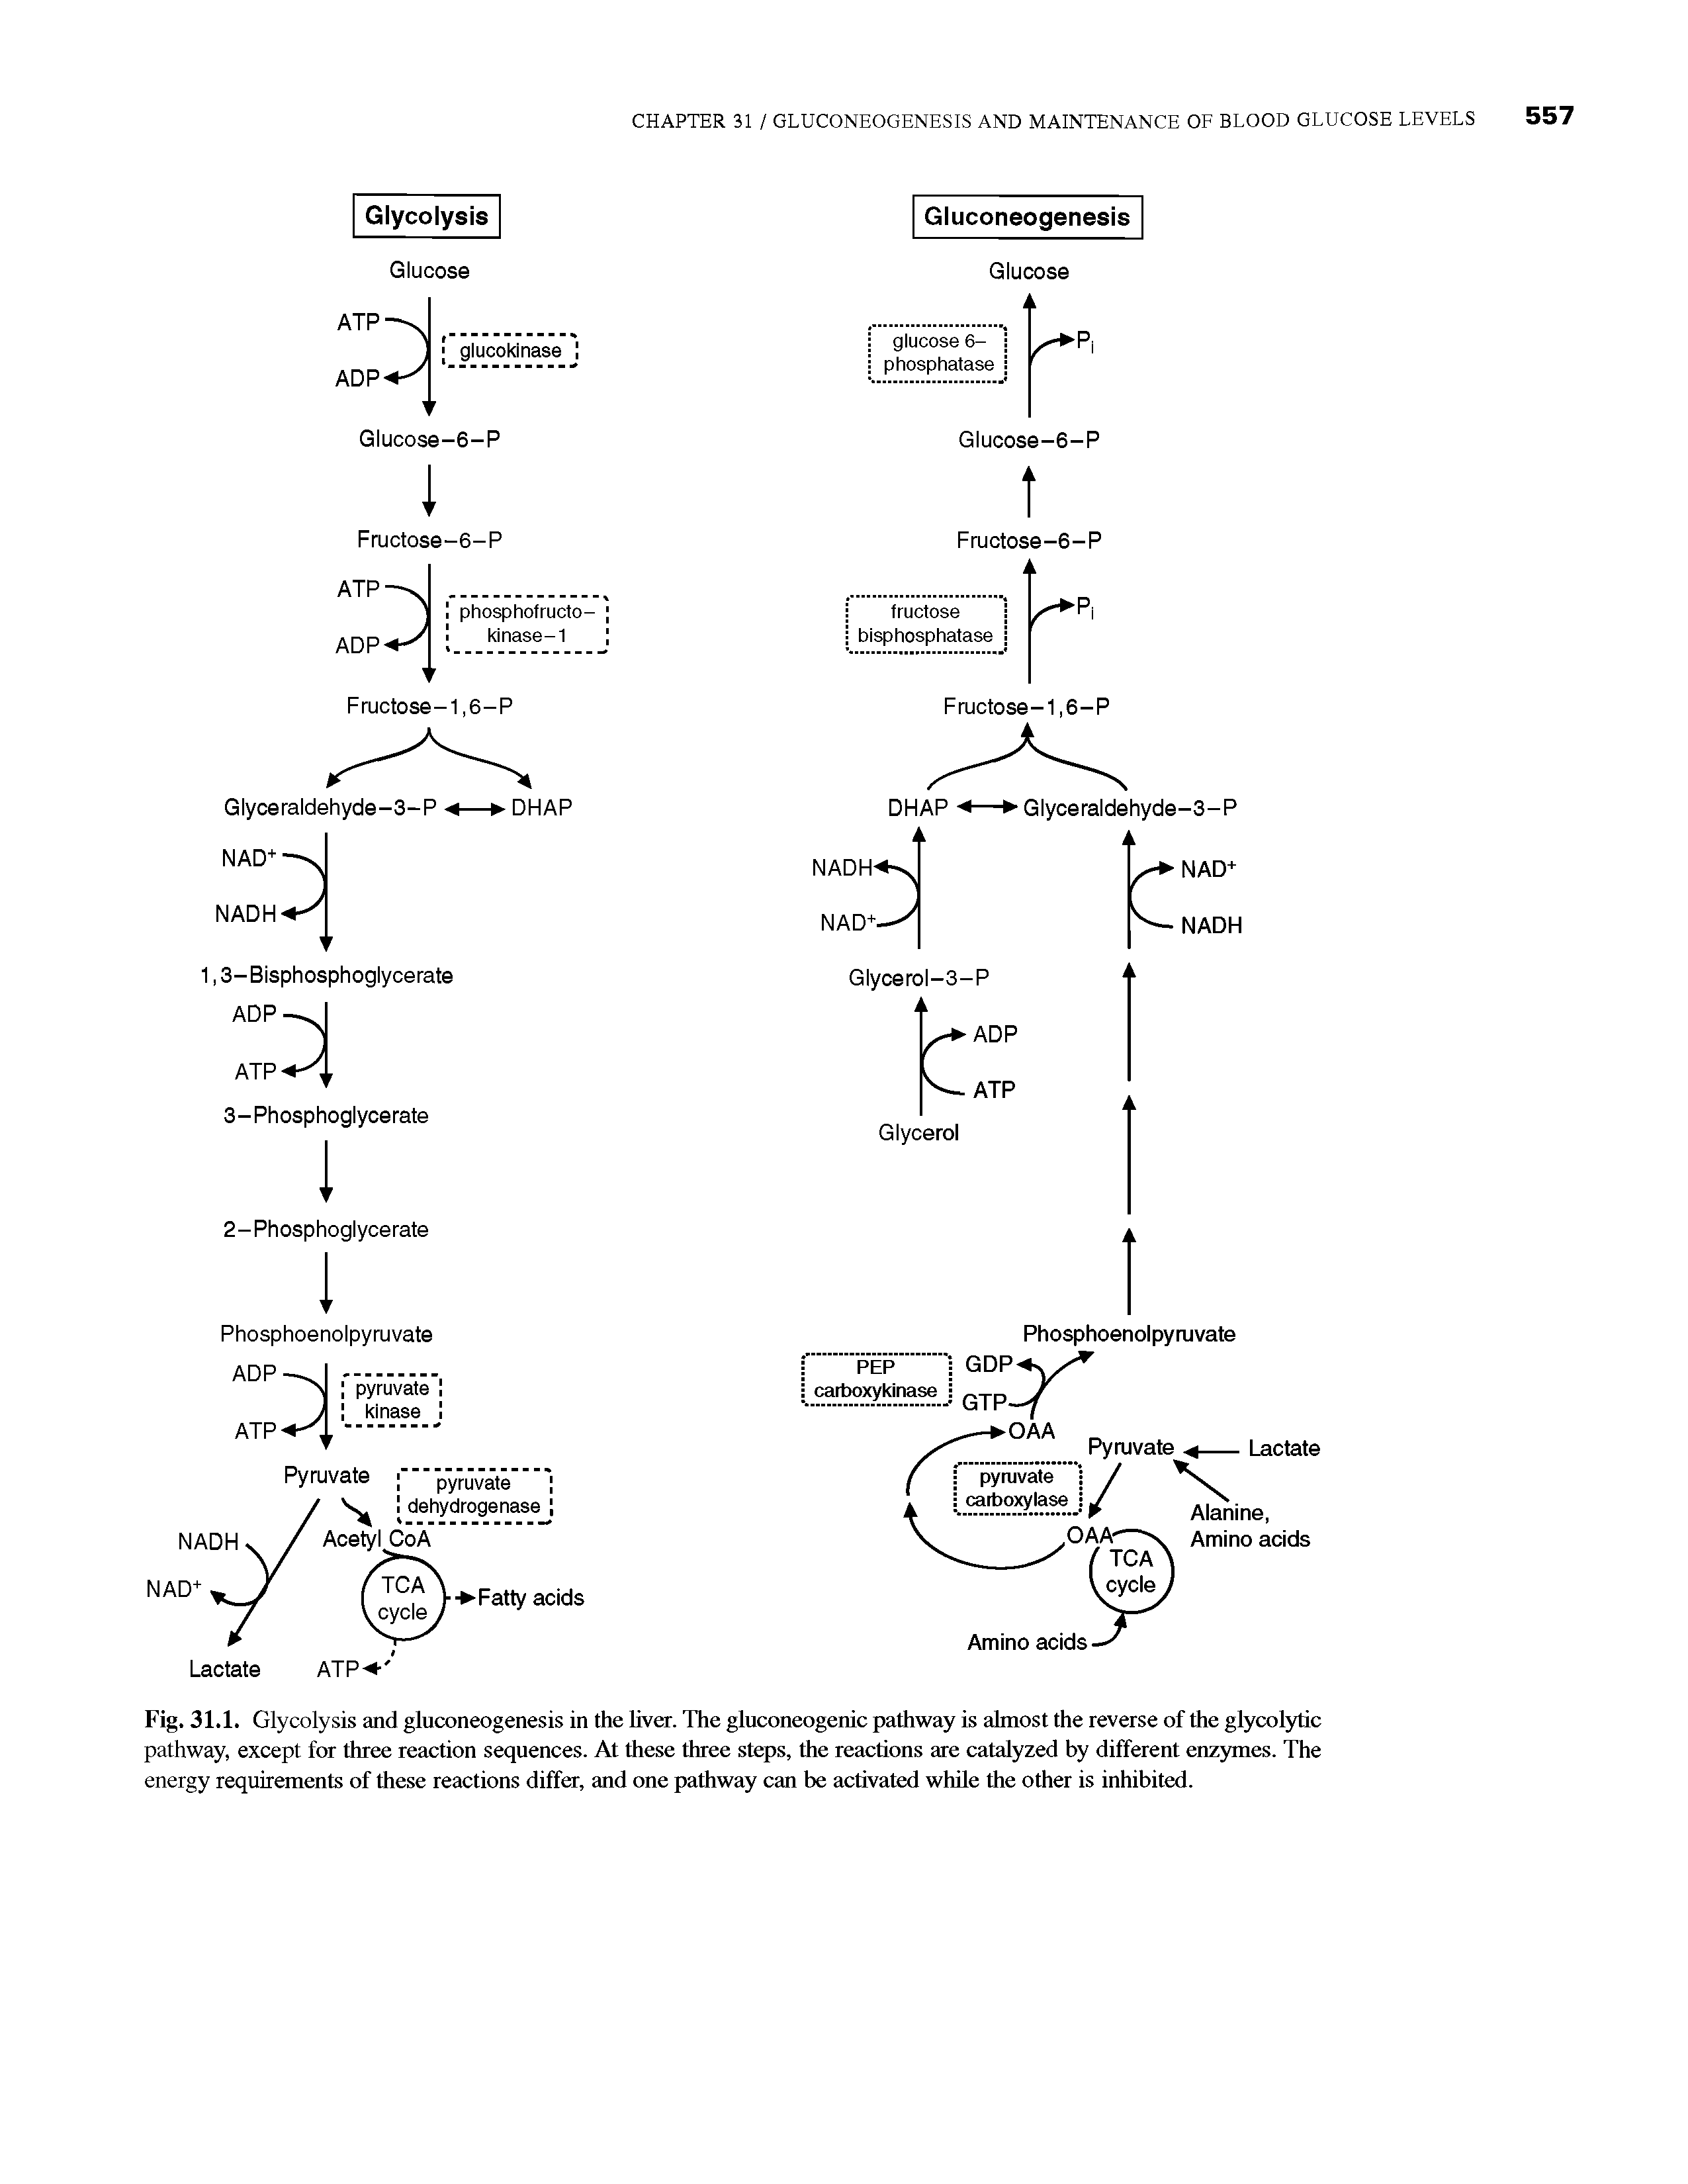 Fig. 31.1. Glycolysis and gluconeogenesis in the hver. The gluconeogenic pathway is almost the reverse of the glycolyrtic pathway, except for three reaction sequences. At these three steps, the reactions are catalyzed by different enzymes. The energy requirements of these reactions differ, and one pathway can be activated while the other is inhibited.